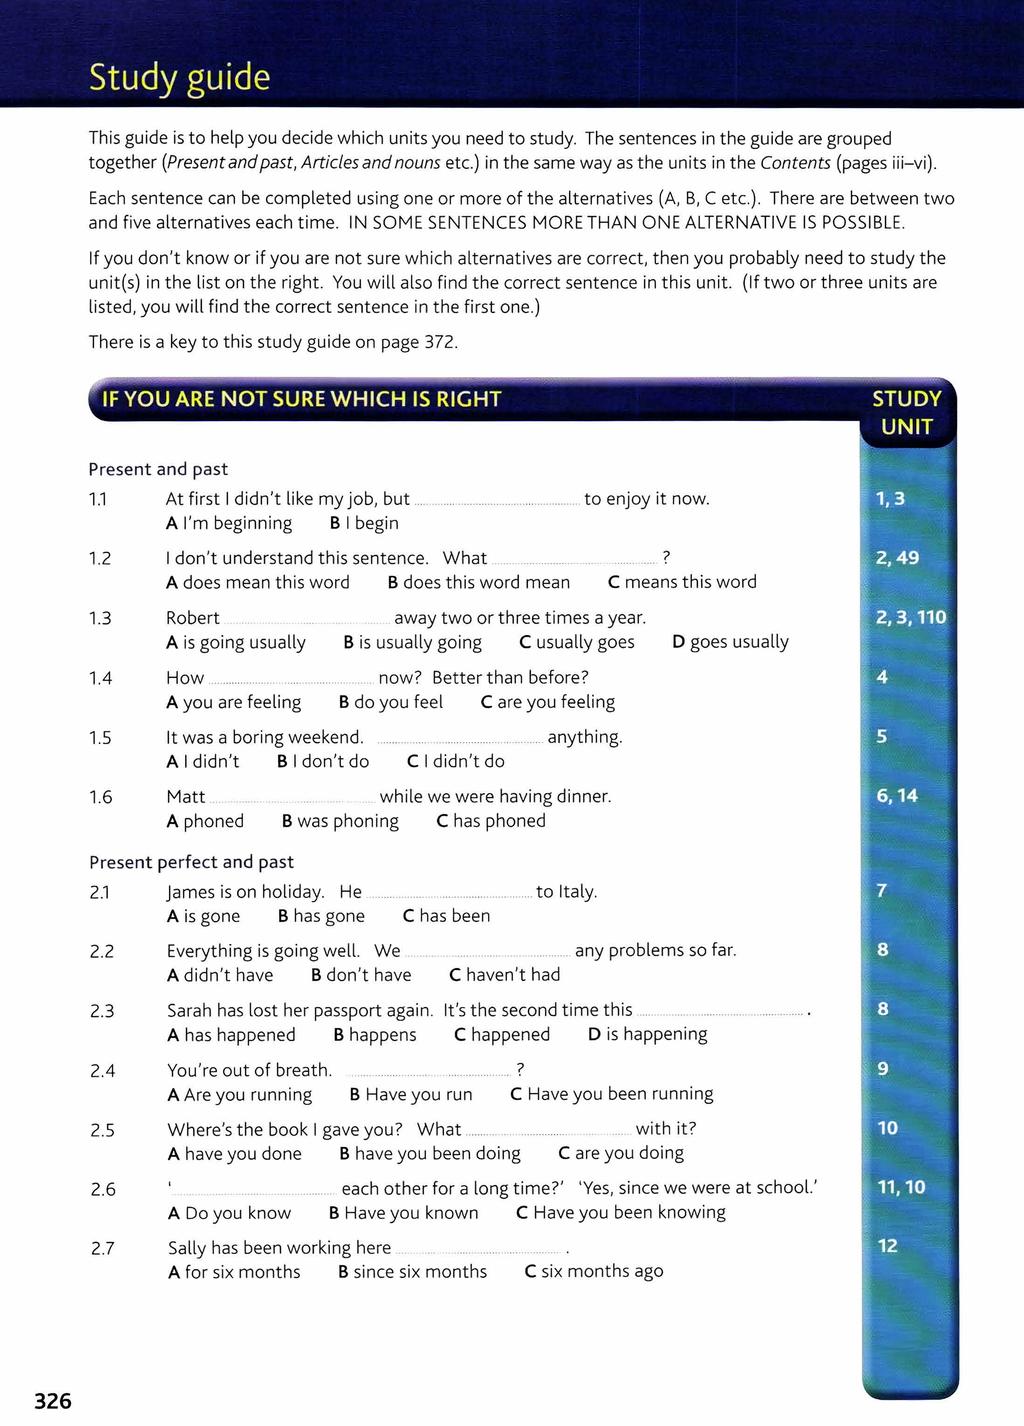 This guide is to help you decide which units you need to study. The sentences in the guide are grouped together (Present and past, Articles and nouns etc.